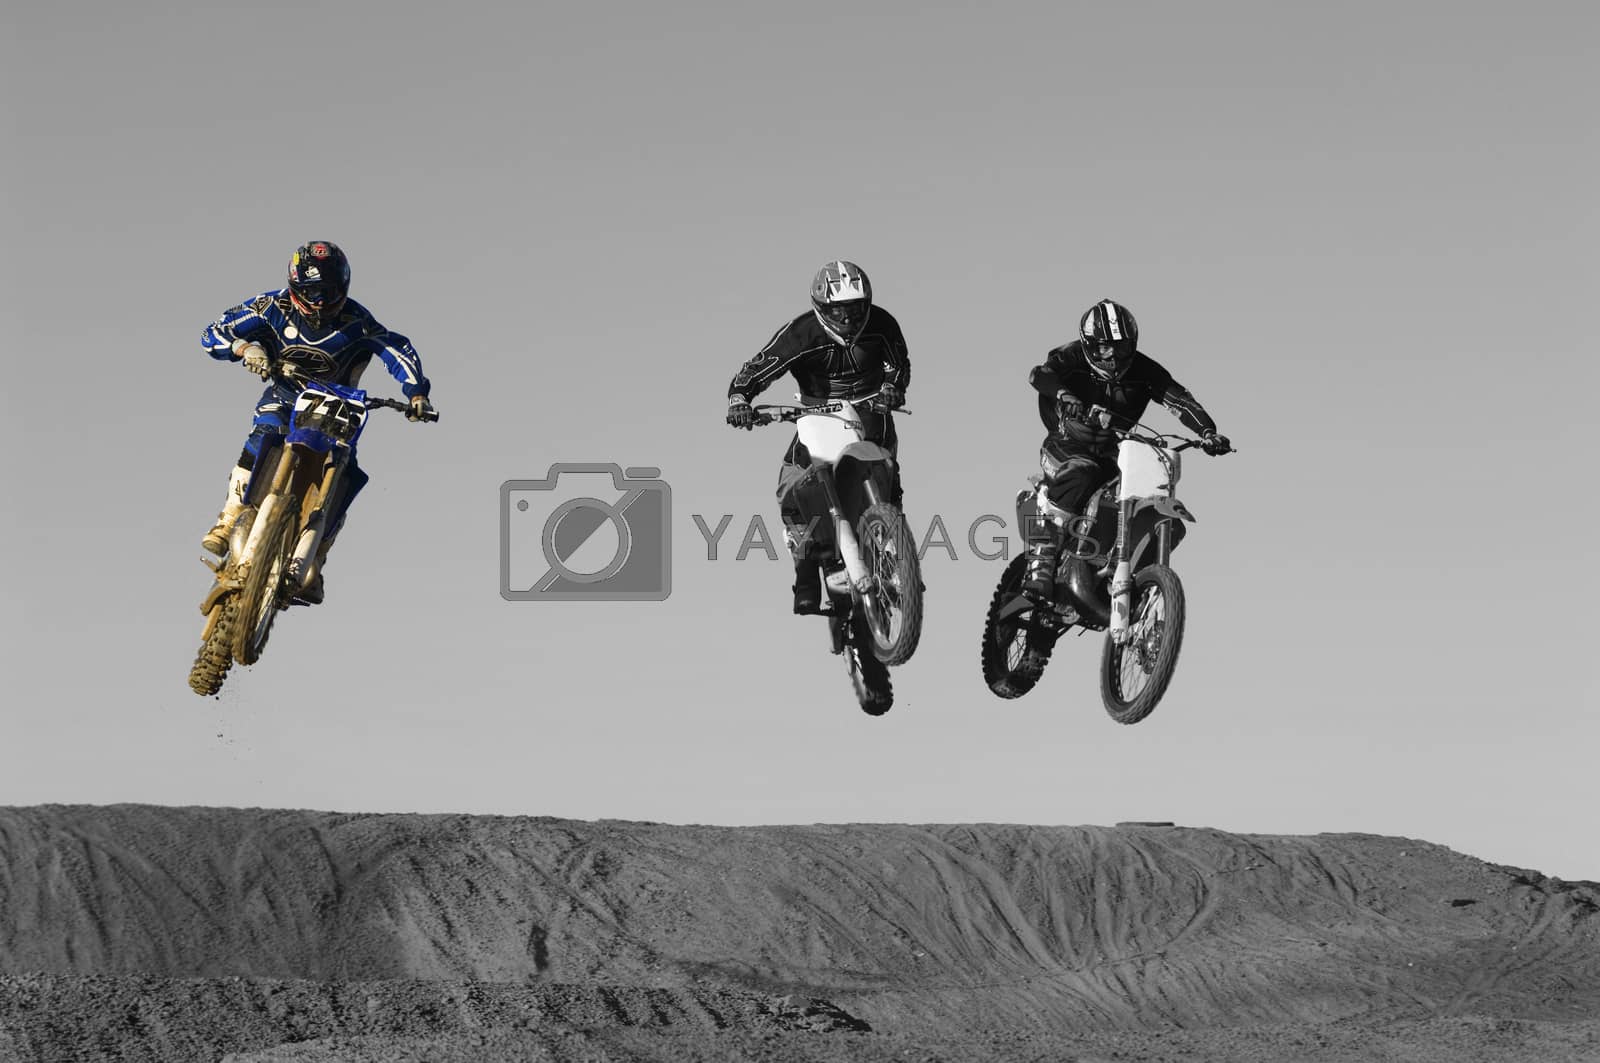 Royalty free image of Young motocross racers riding on dirt track by moodboard